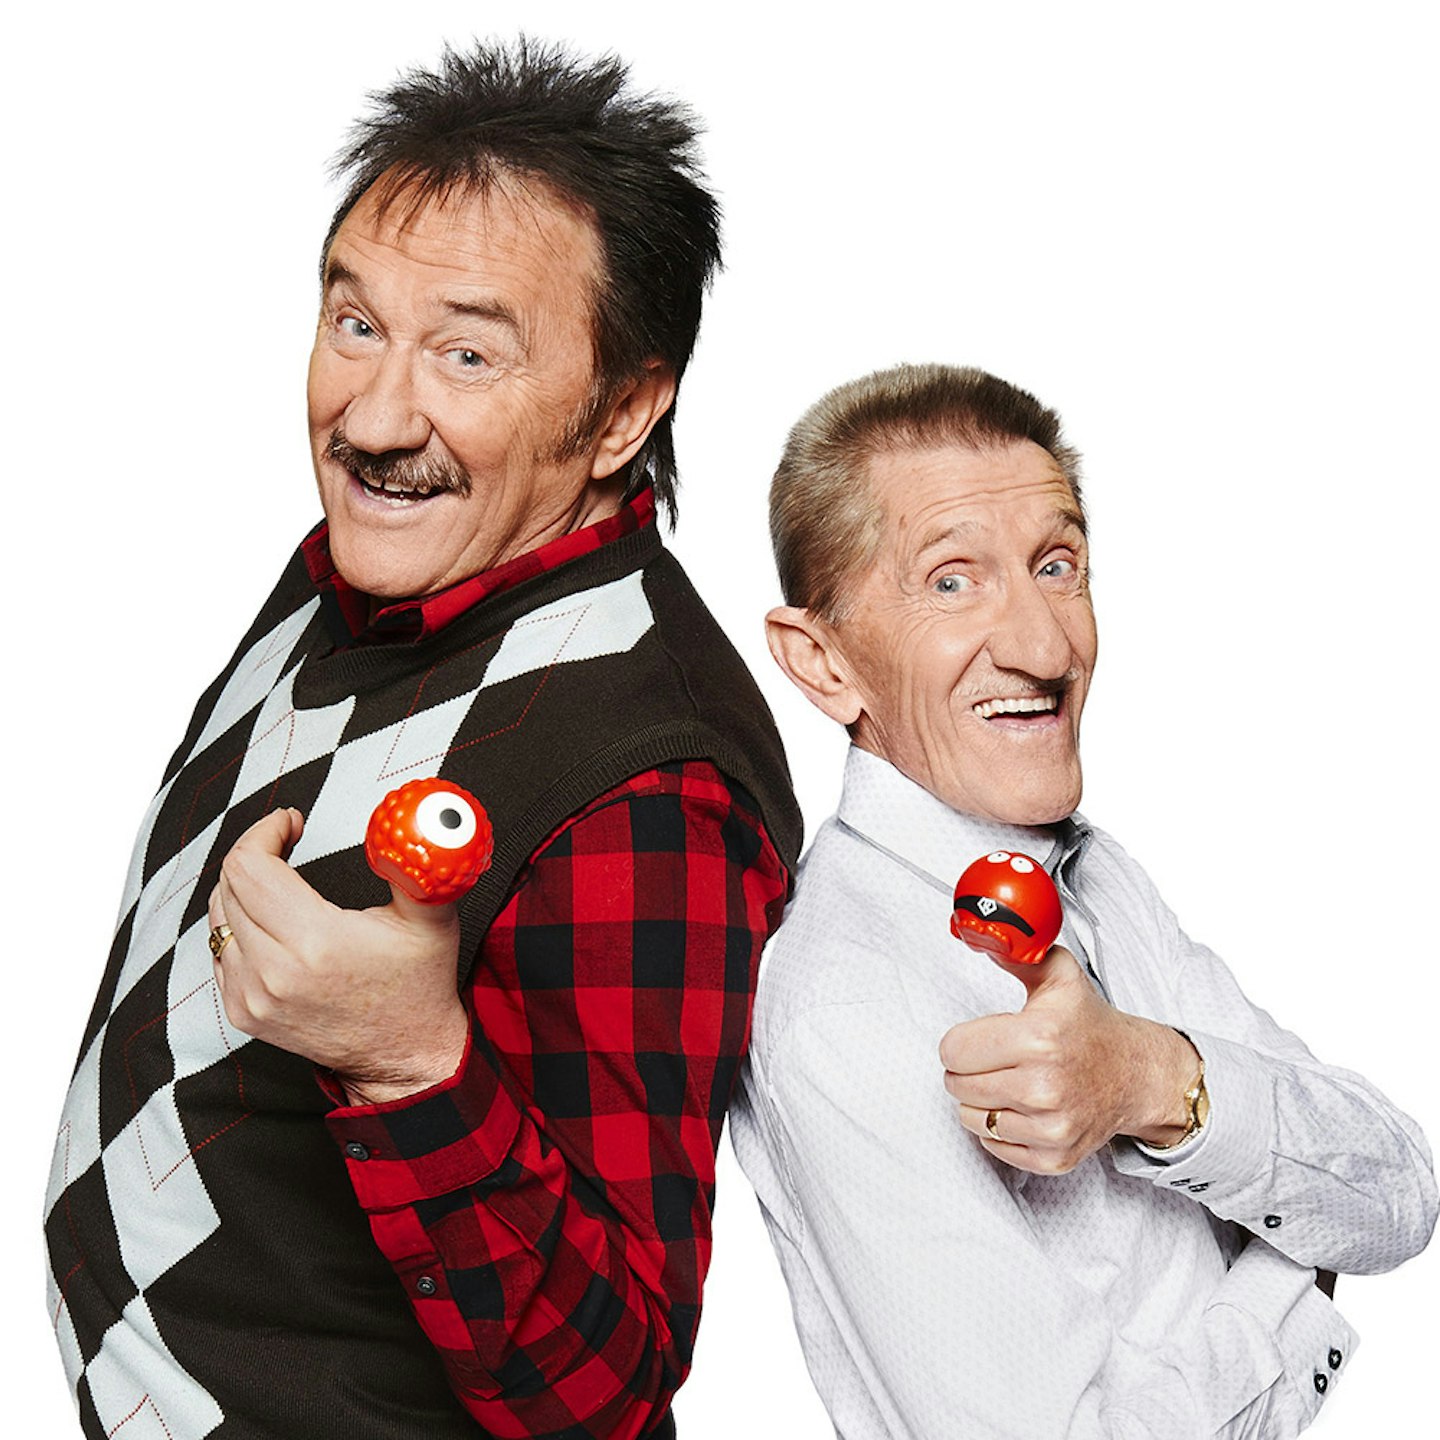 Chuckle brothers